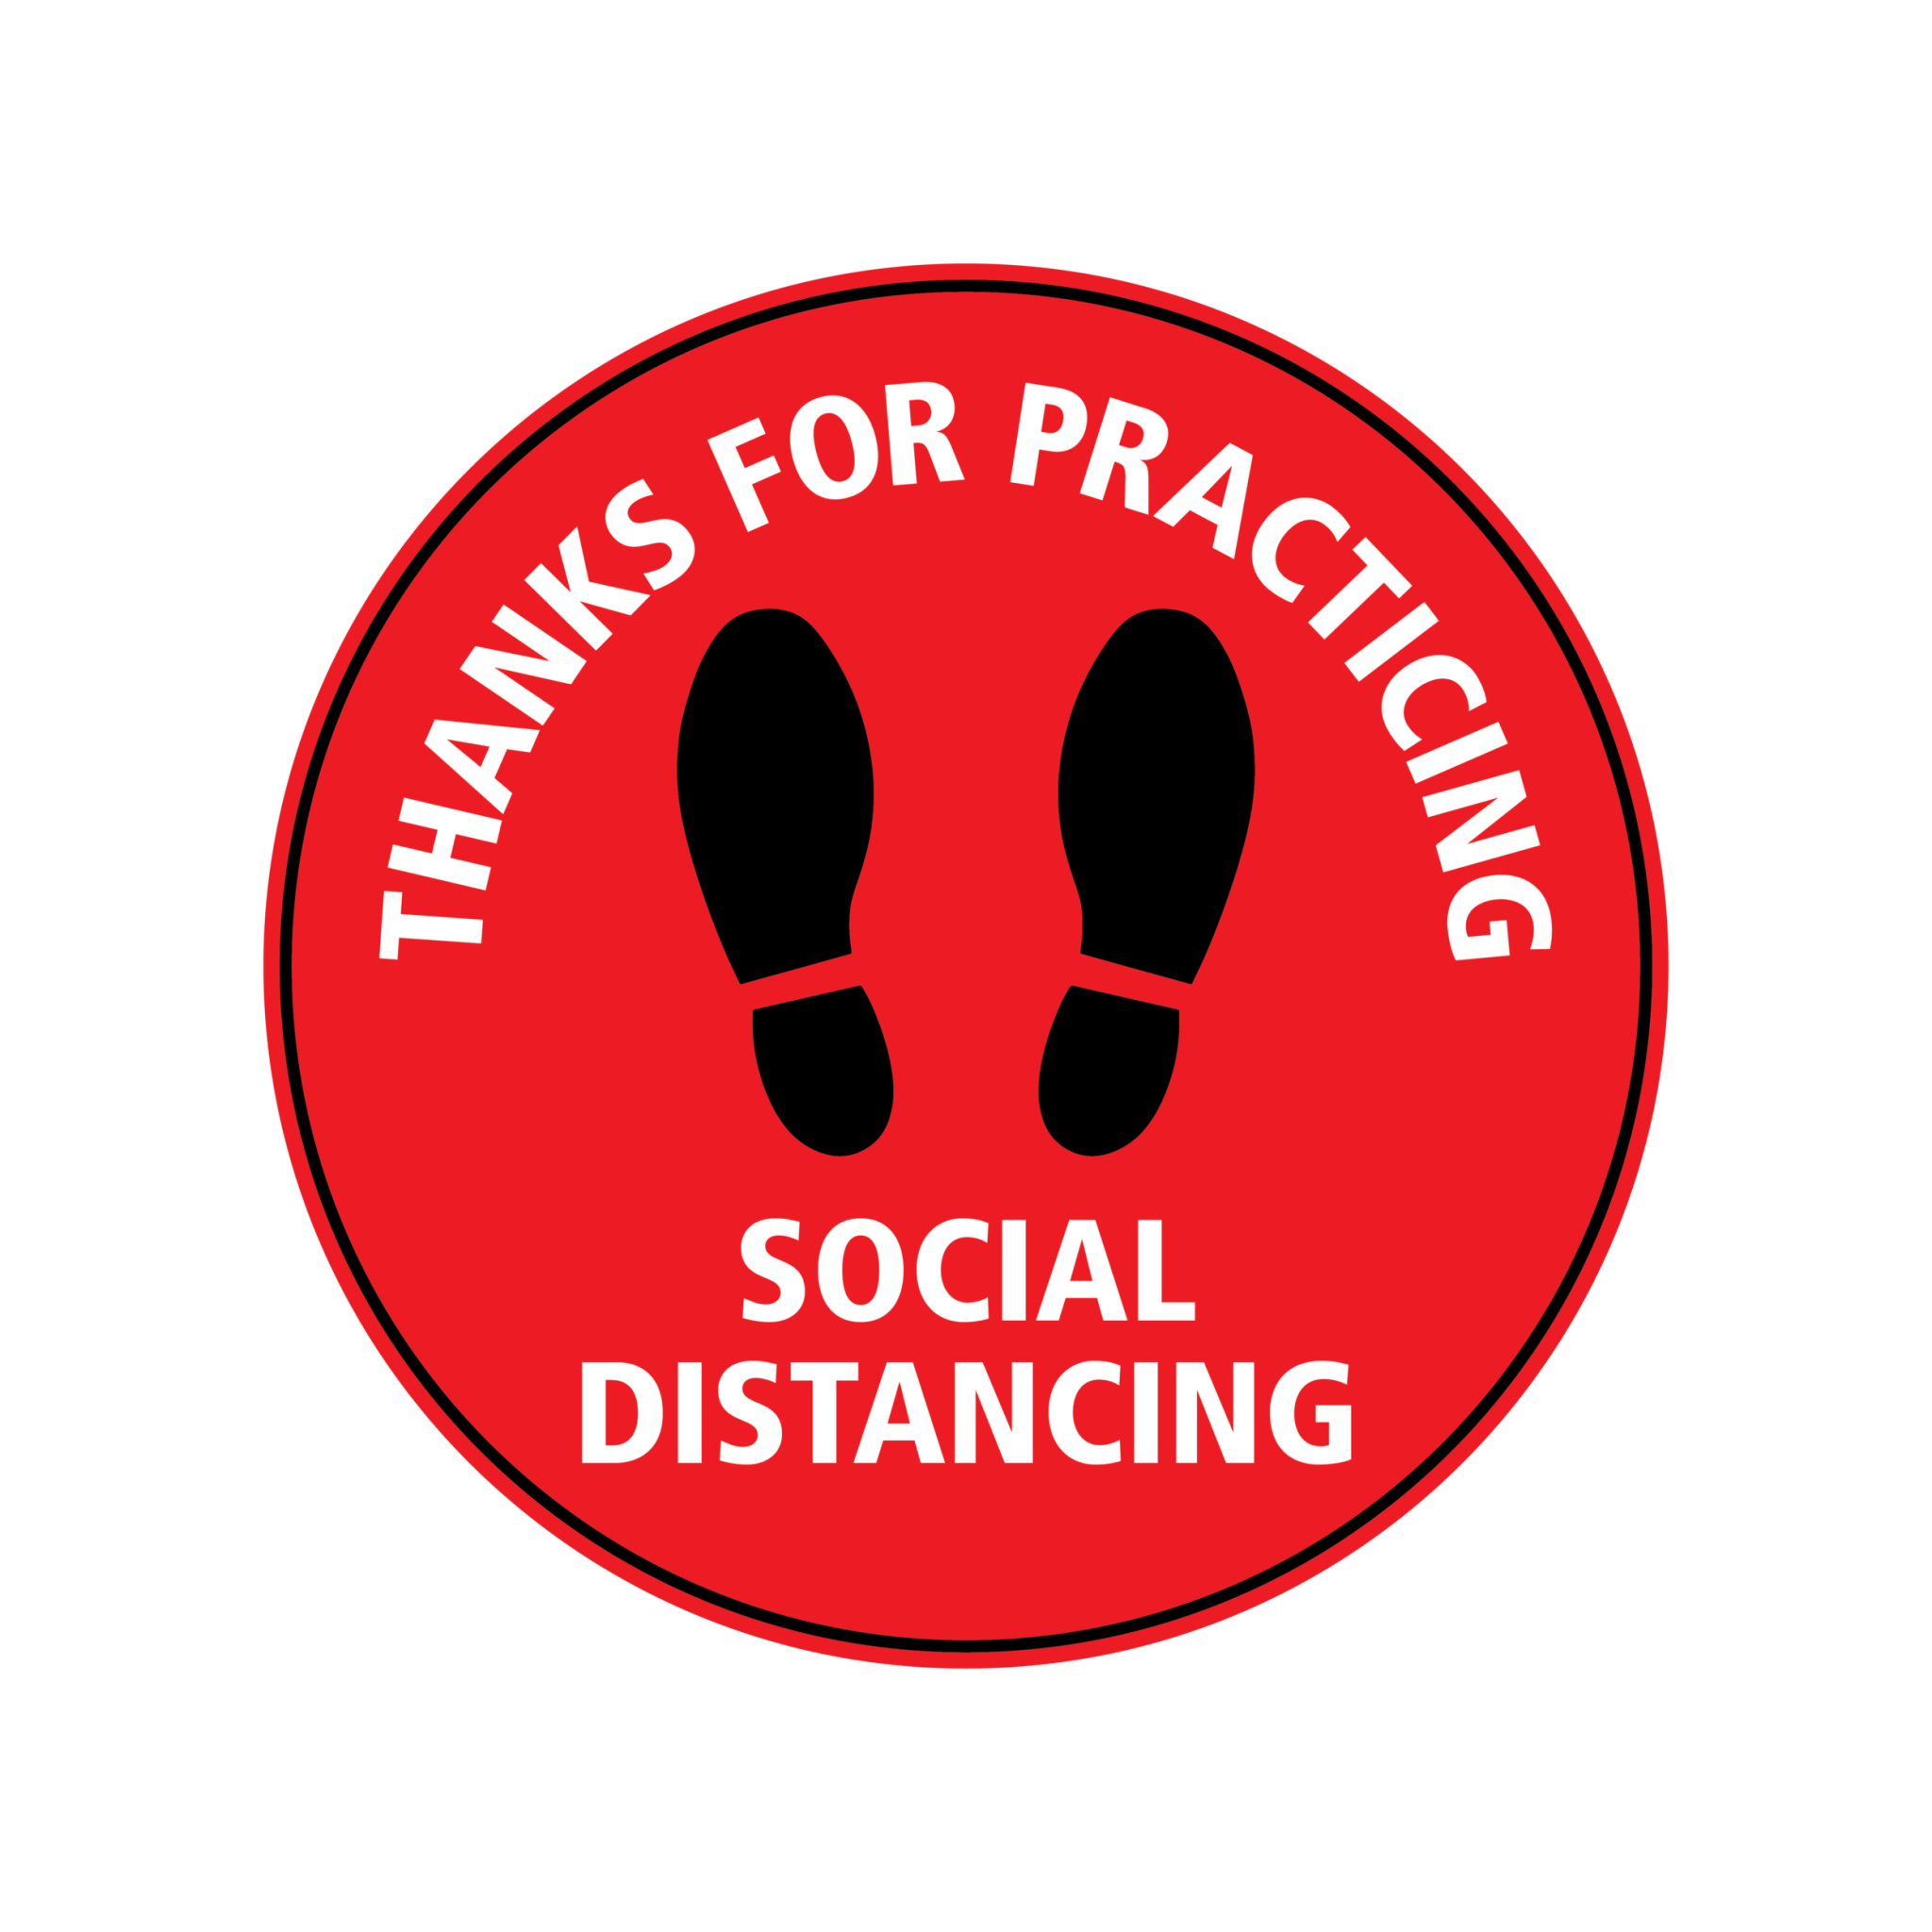 THANKS FOR PRACTICING SOCIAL DISTANCING - CYANvisuals